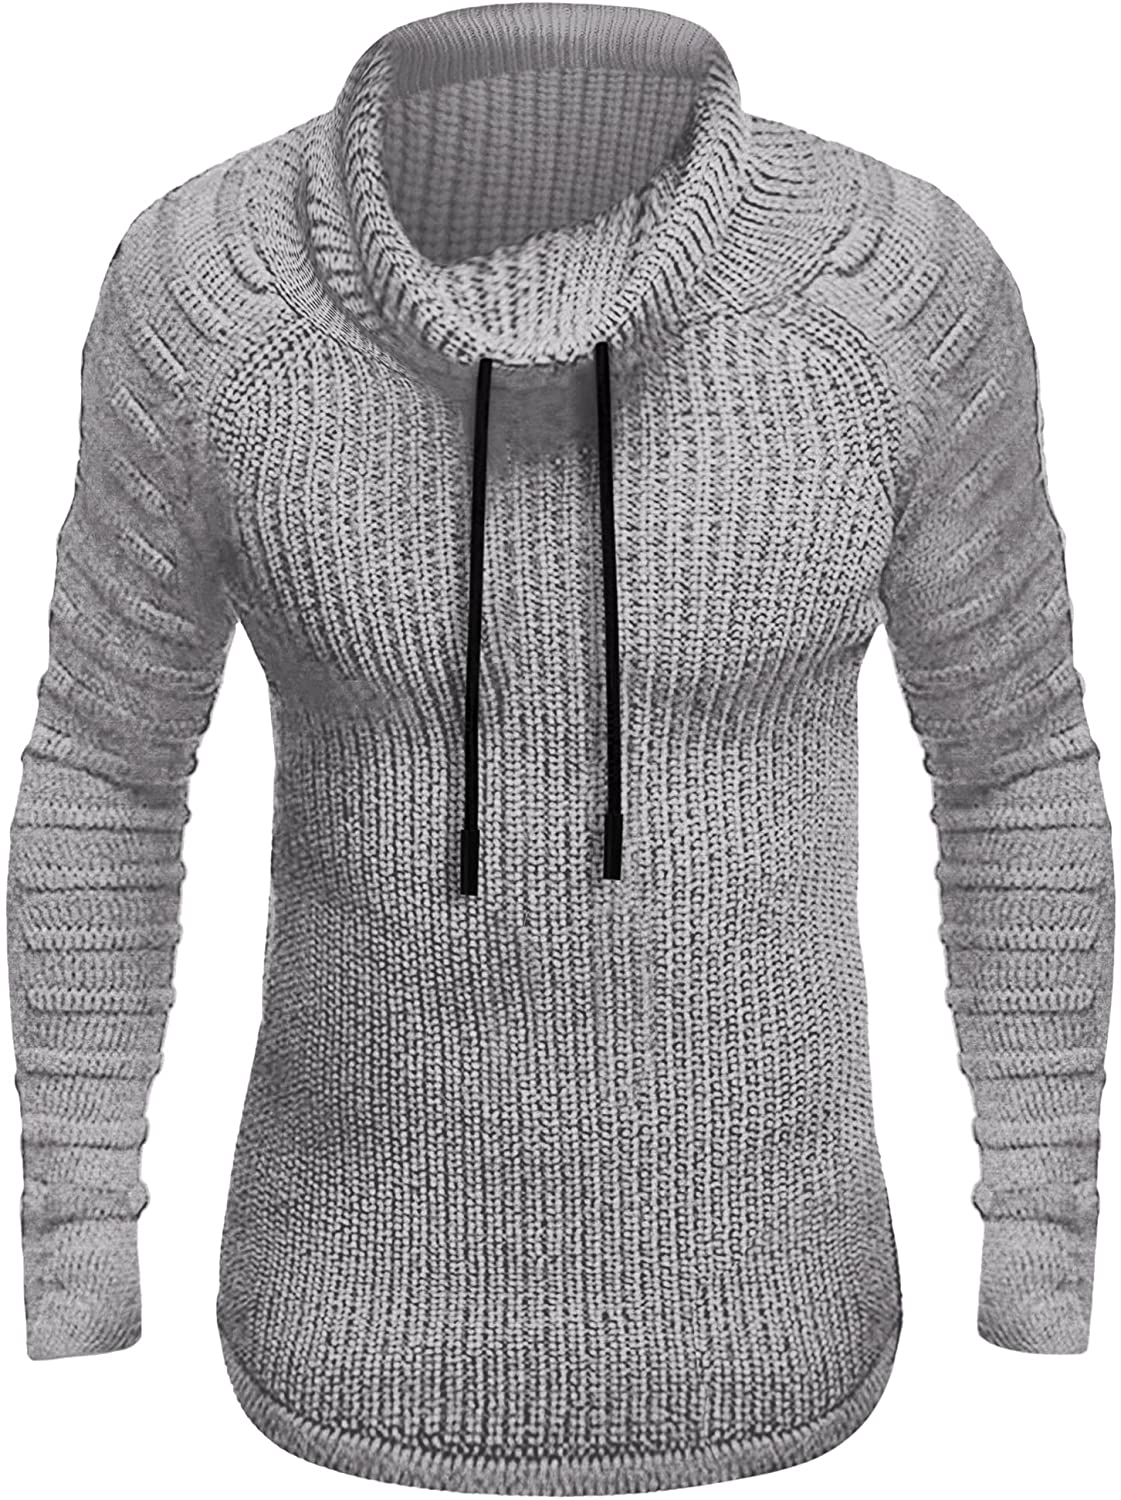 COOFANDY Men's Knitted Turtleneck Sweater Thermal Thick Hightneck Shawl Collar Sweater 